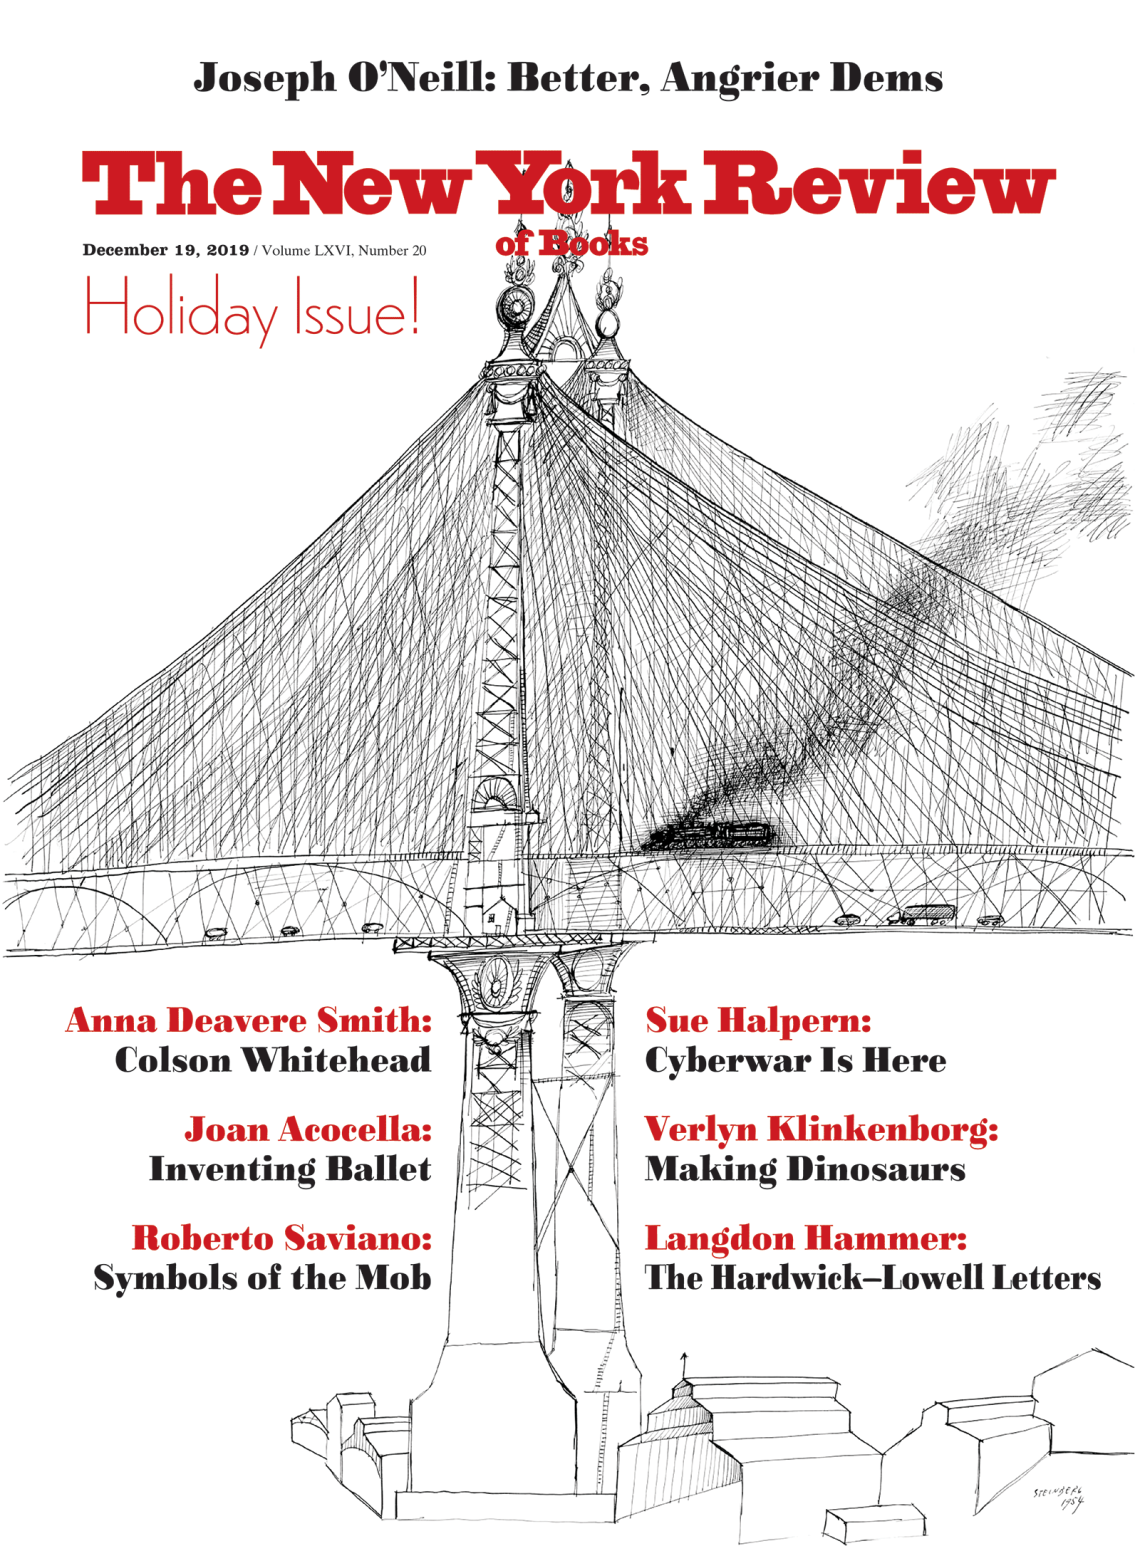 Image of the December 19, 2019 issue cover.